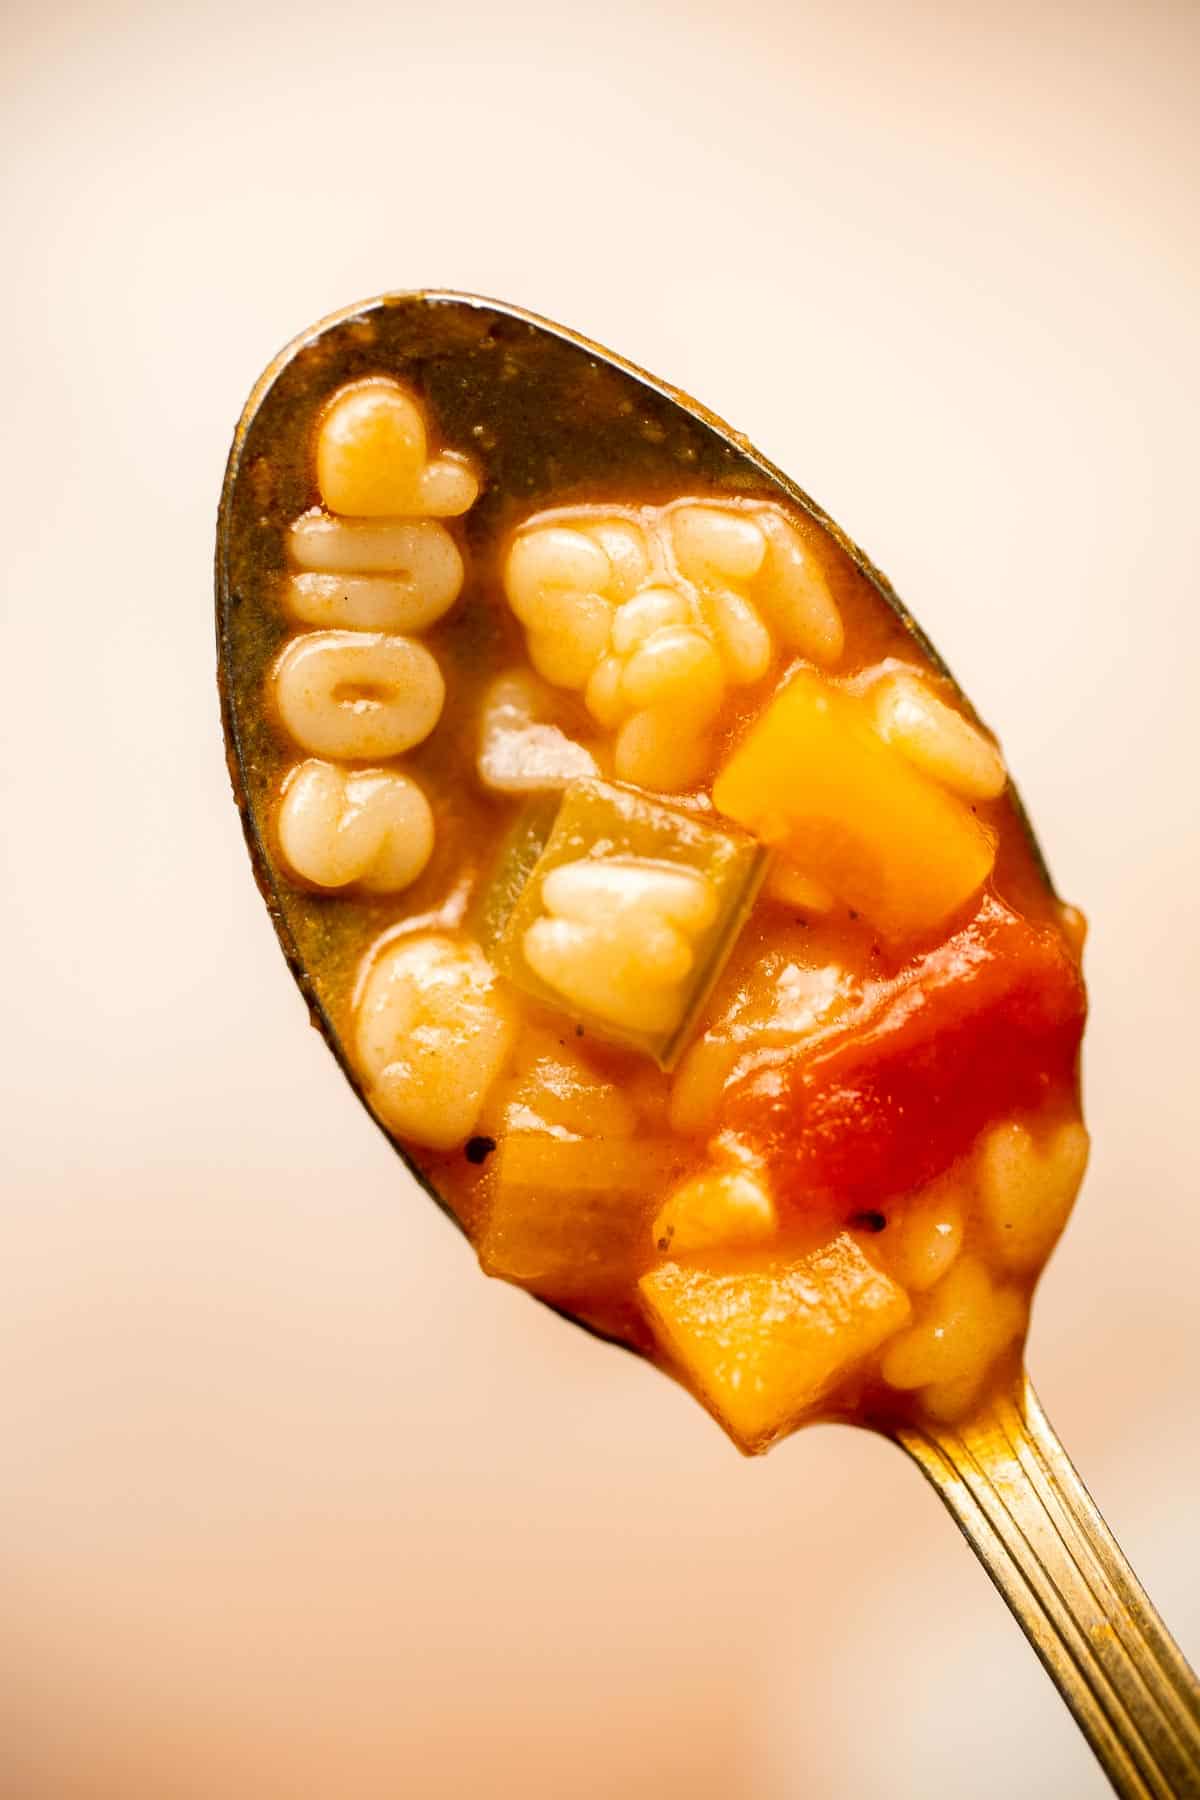 Homemade Alphabet Soup will quickly become a family favorite with its hearty vegetables and fun alphabet noodles. It's quick and easy to make in 30 minutes. | aheadofthyme.com